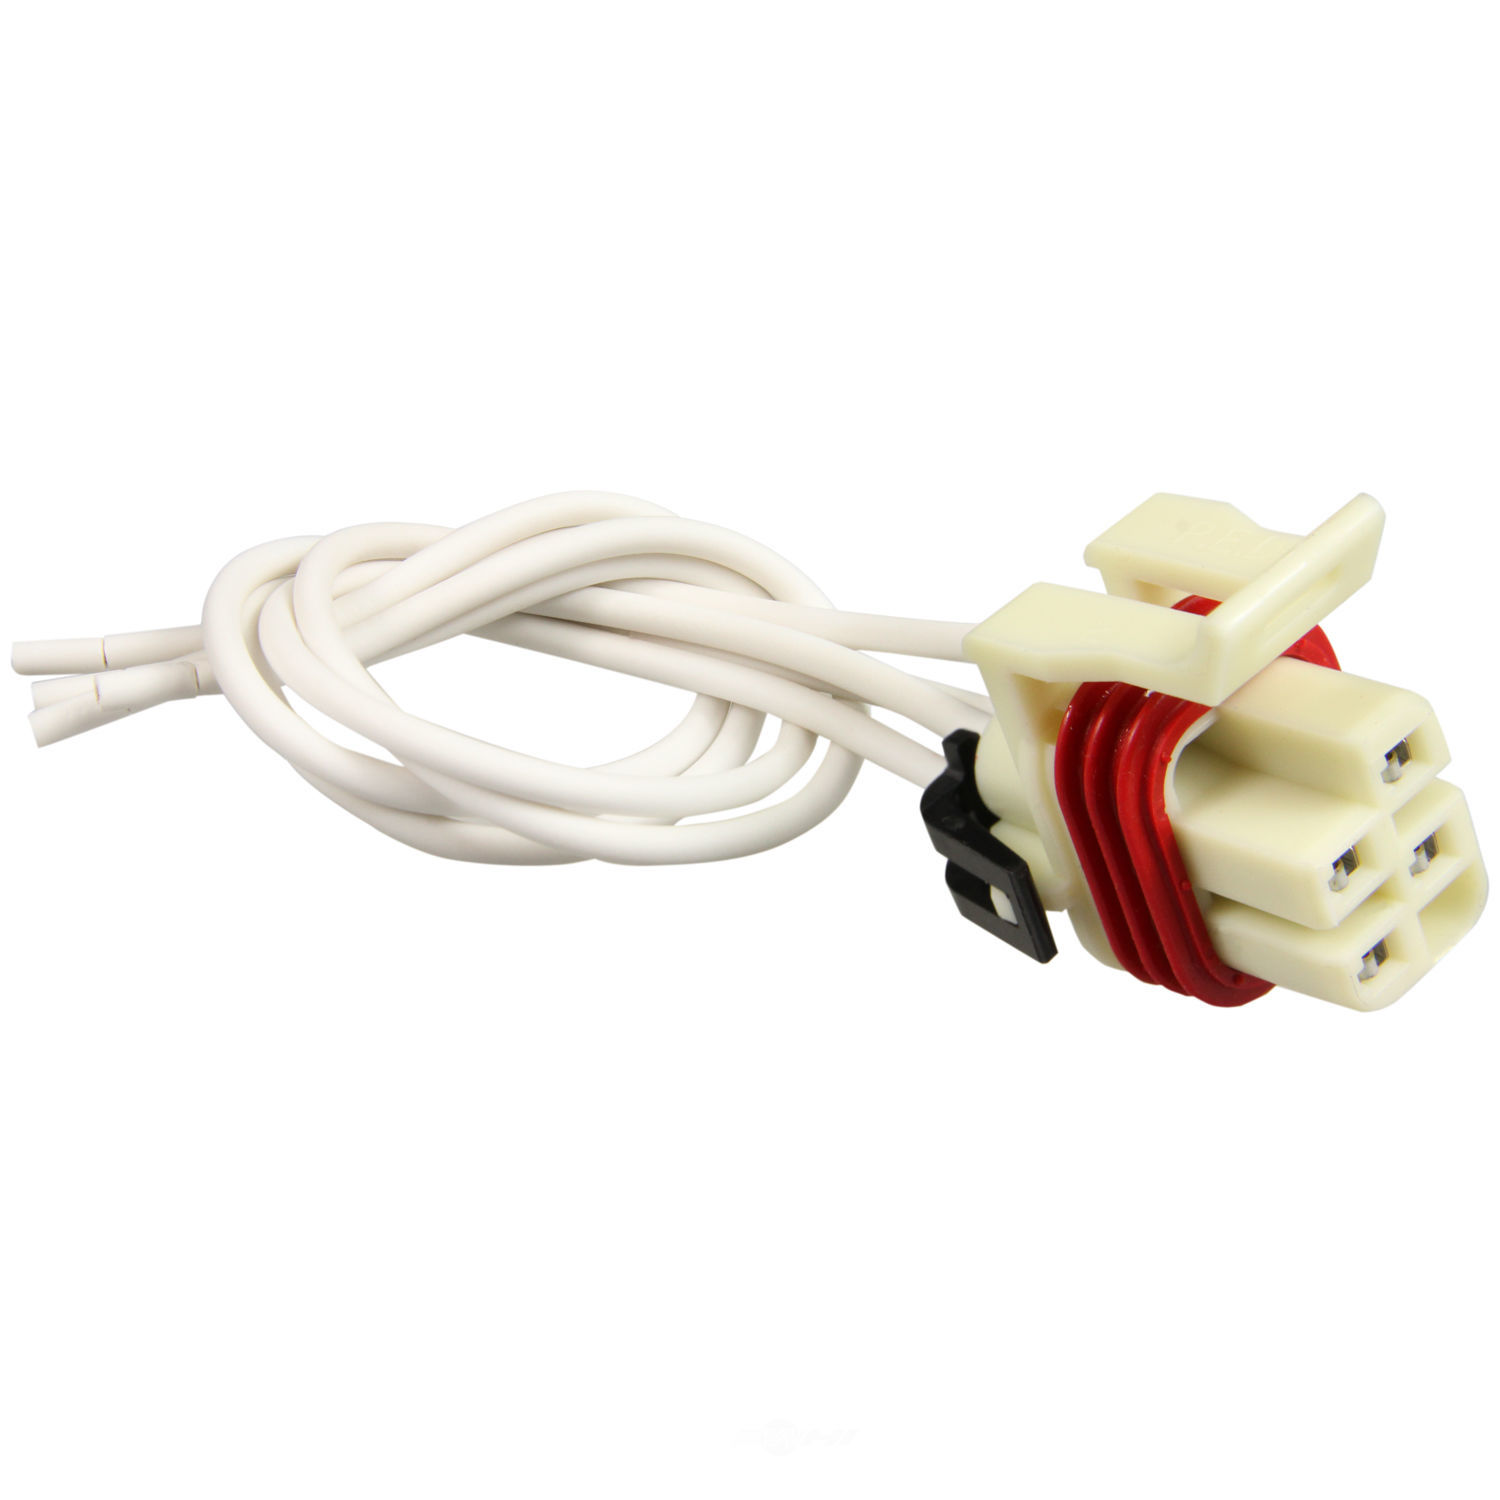 WVE - Neutral Safety Switch Connector - WVE 1P1052